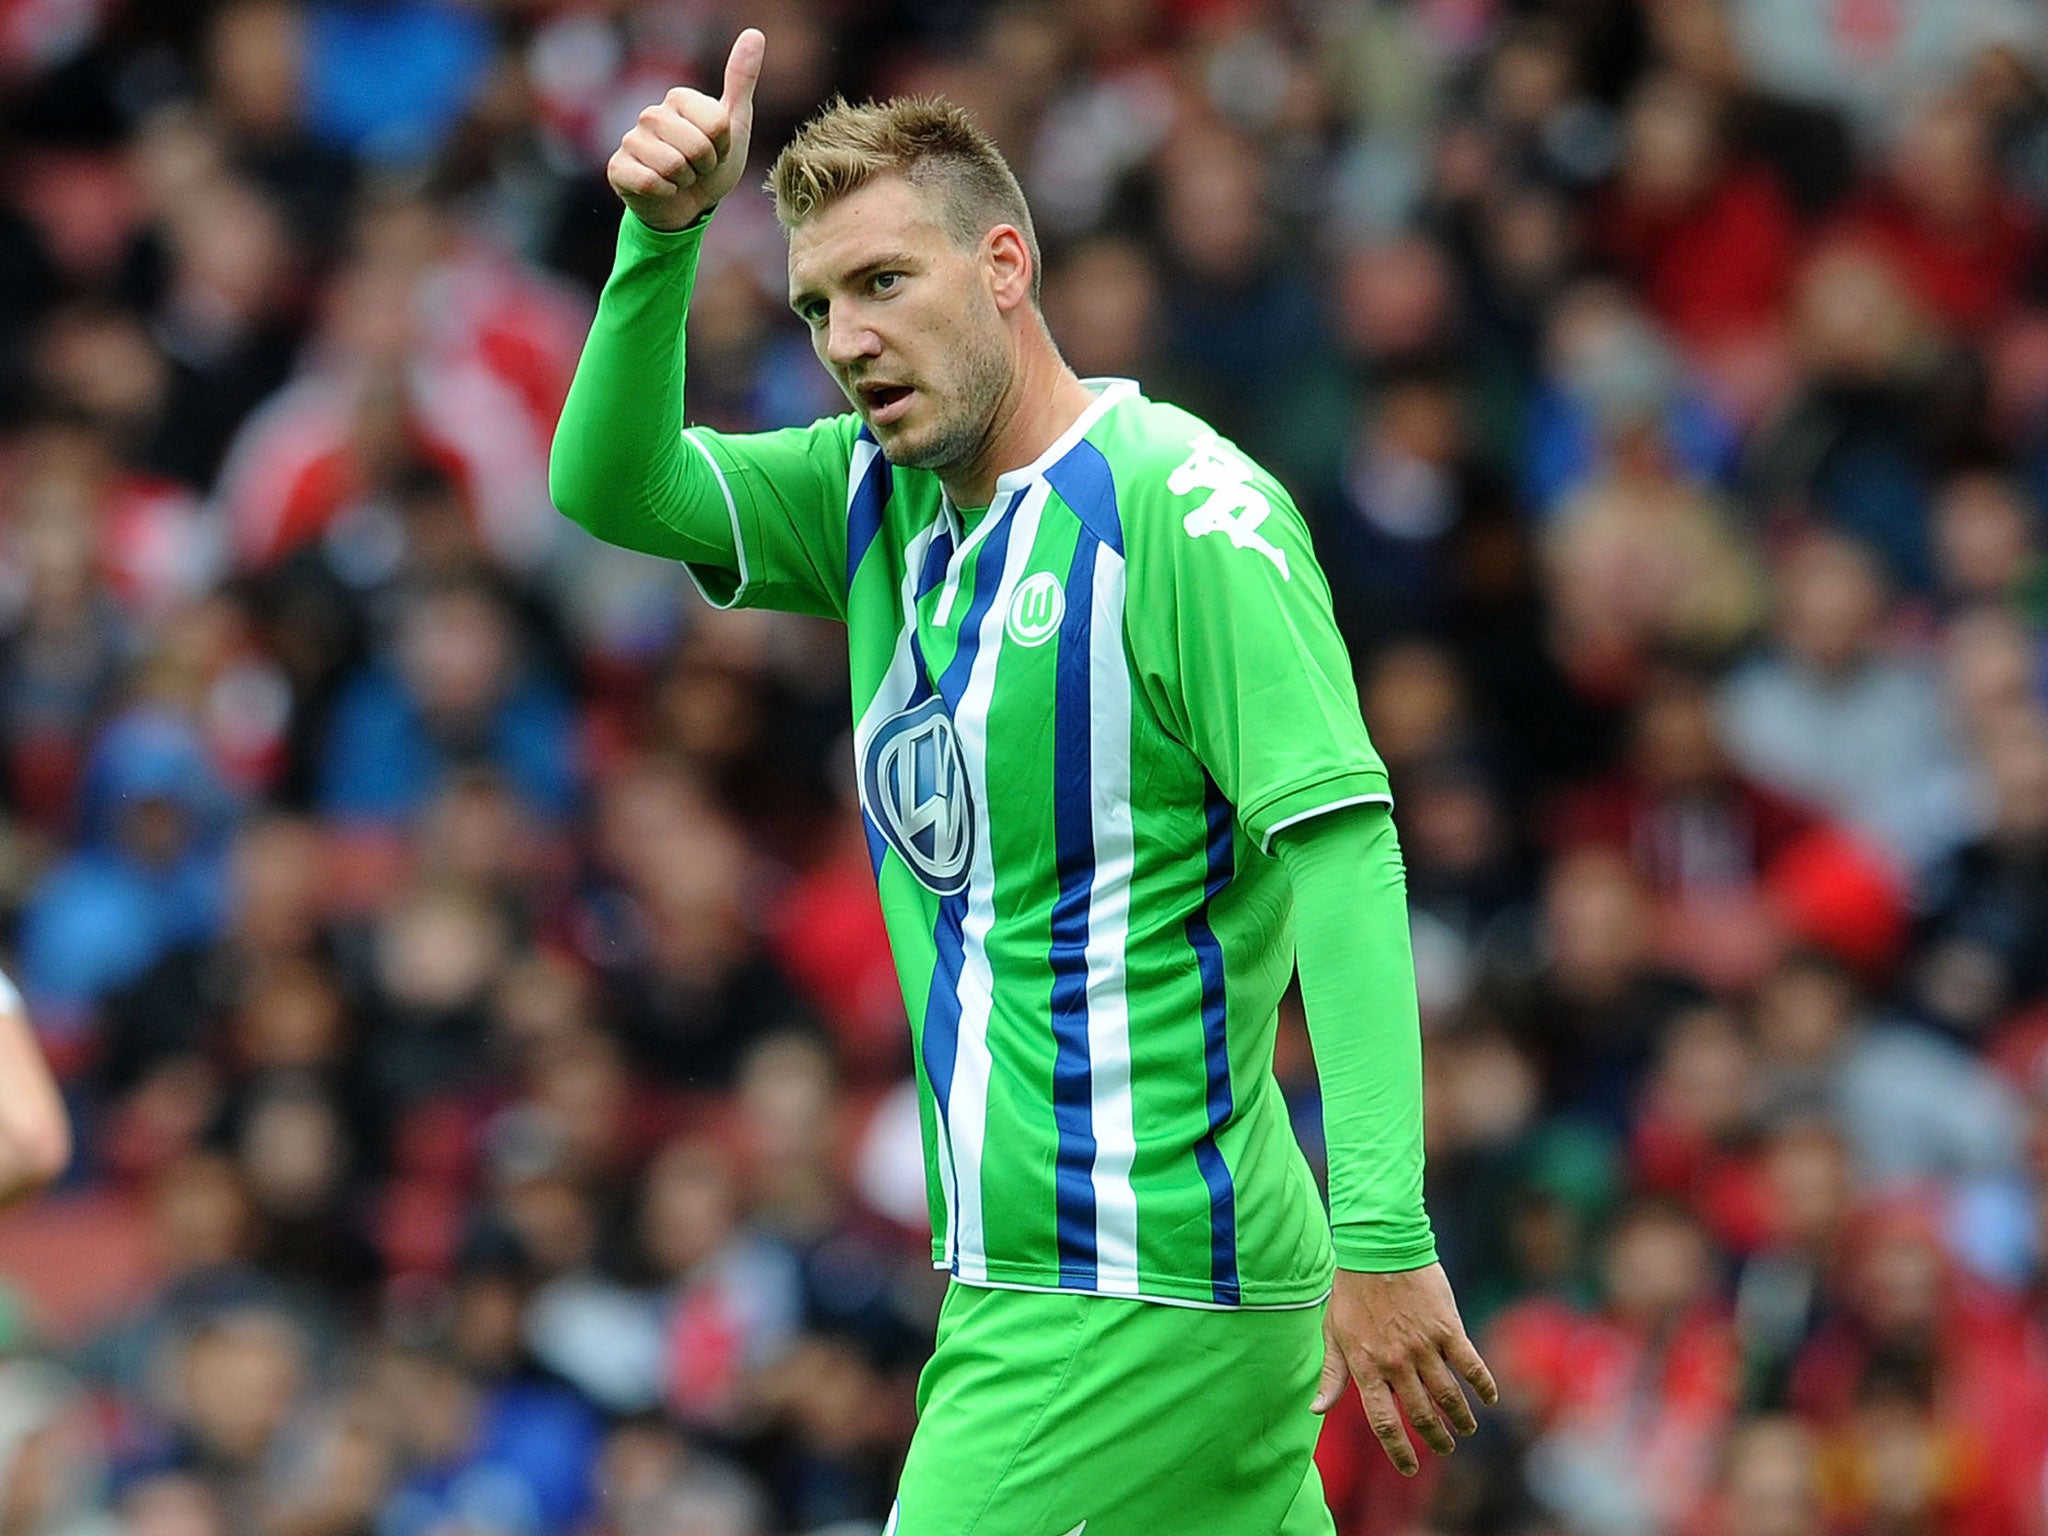 Nicklas Bendtner has been linked in Germany with a move to Newcastle